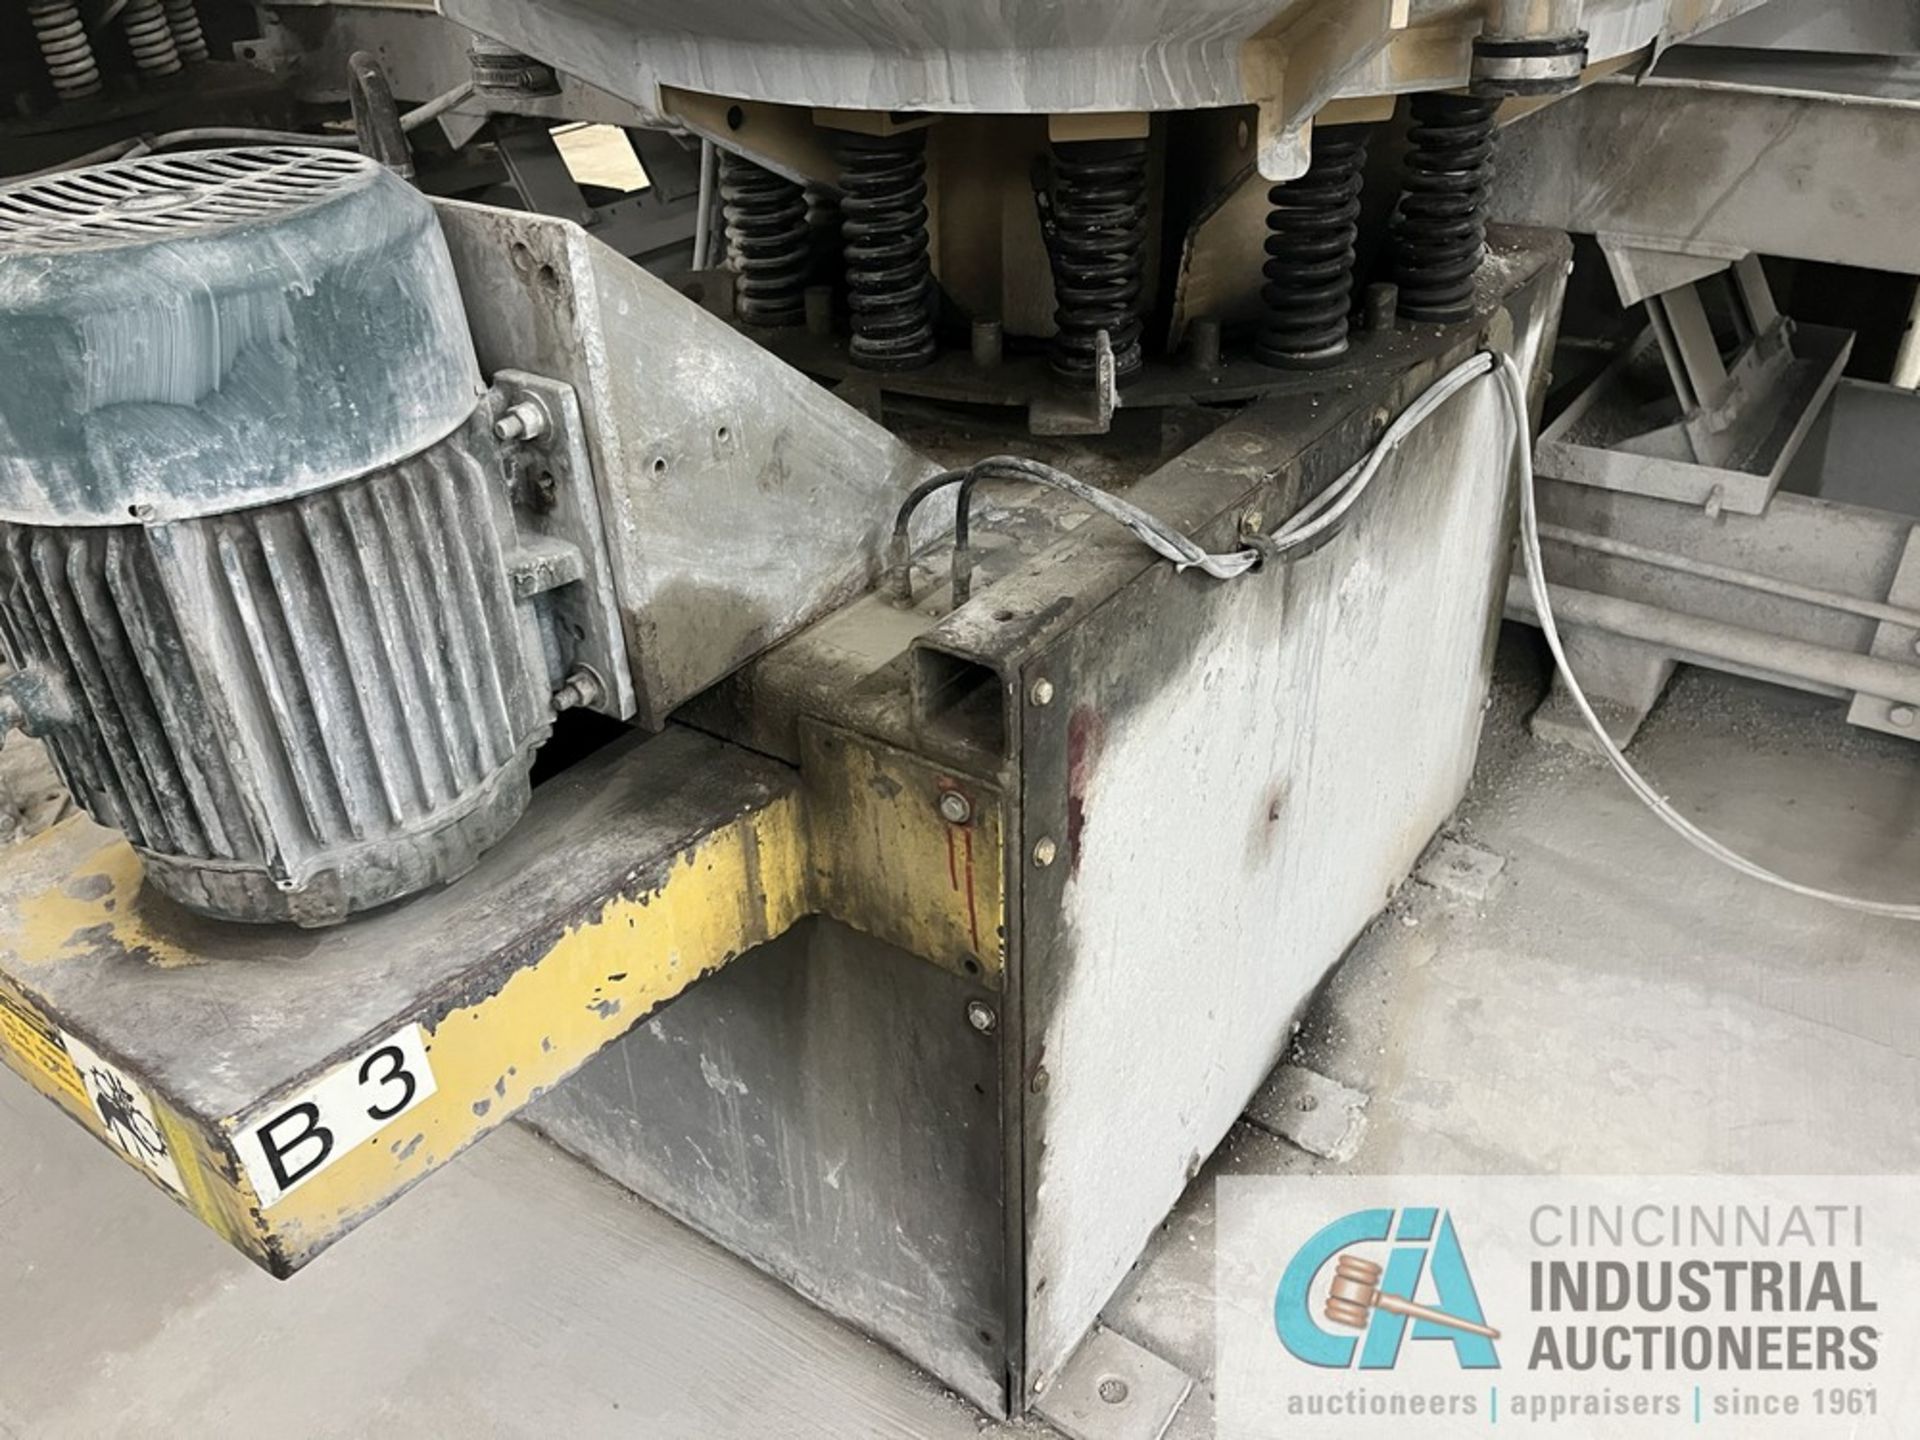 56" DIAMETER / 23 CUBIC FOOT ALMCO VIBRATORY FINISHING BOWL **SUBJECT TO OVERALL BID** - Image 3 of 7